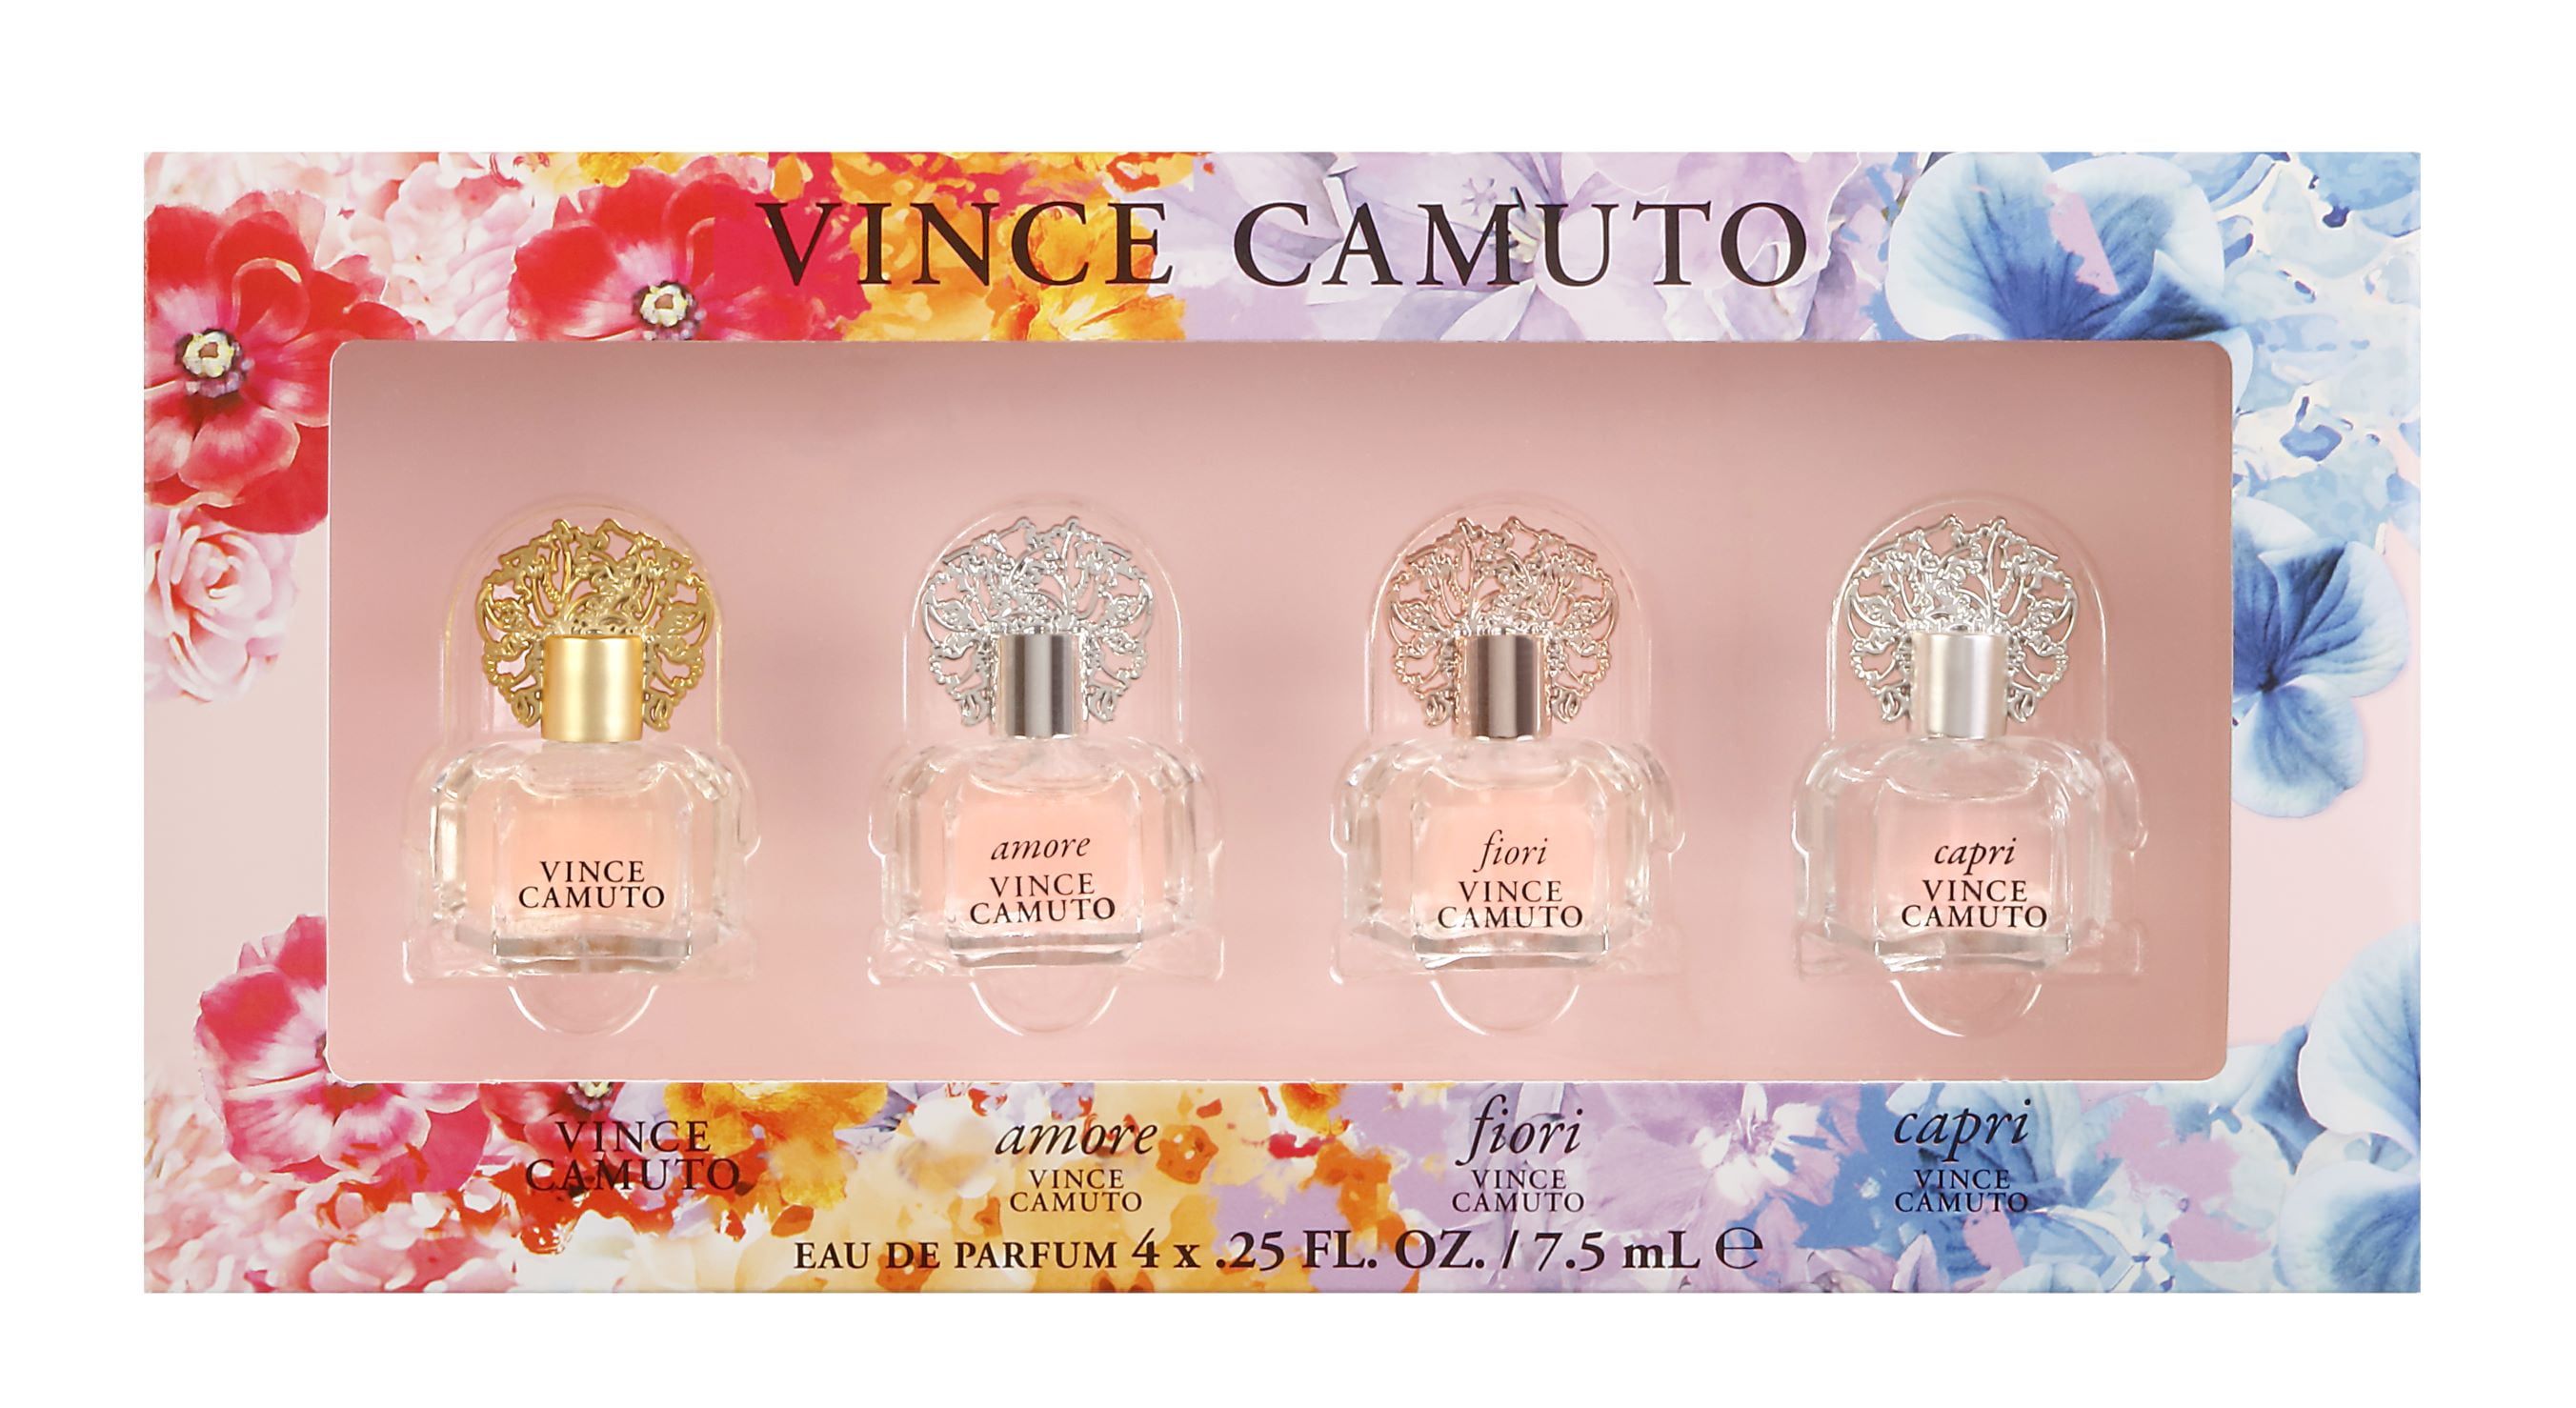 ($125 Value) Vince Camuto Coffret Perfume Gift Set for Women, 4 Pieces ...